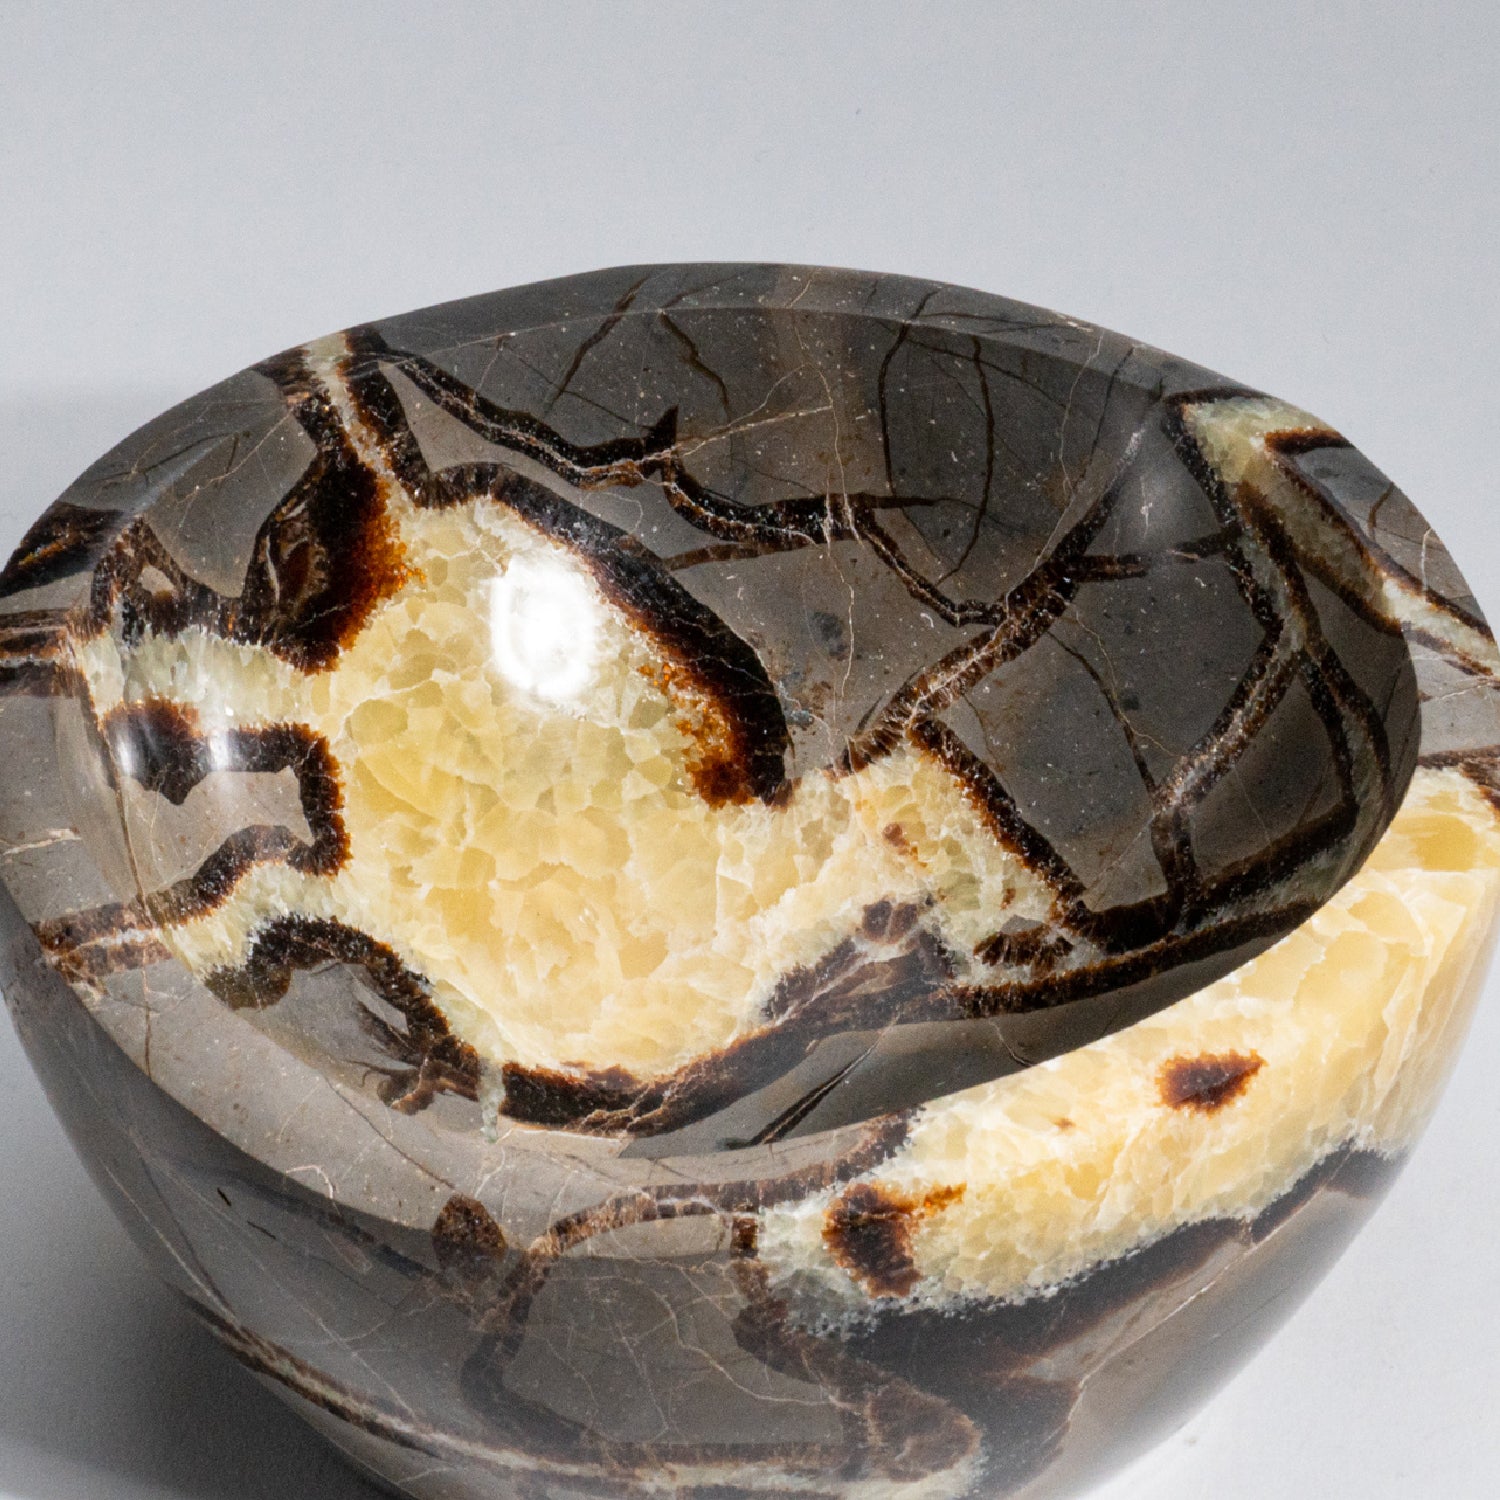 Genuine Polished Septarian Bowl from Madagascar (4.5 lbs)